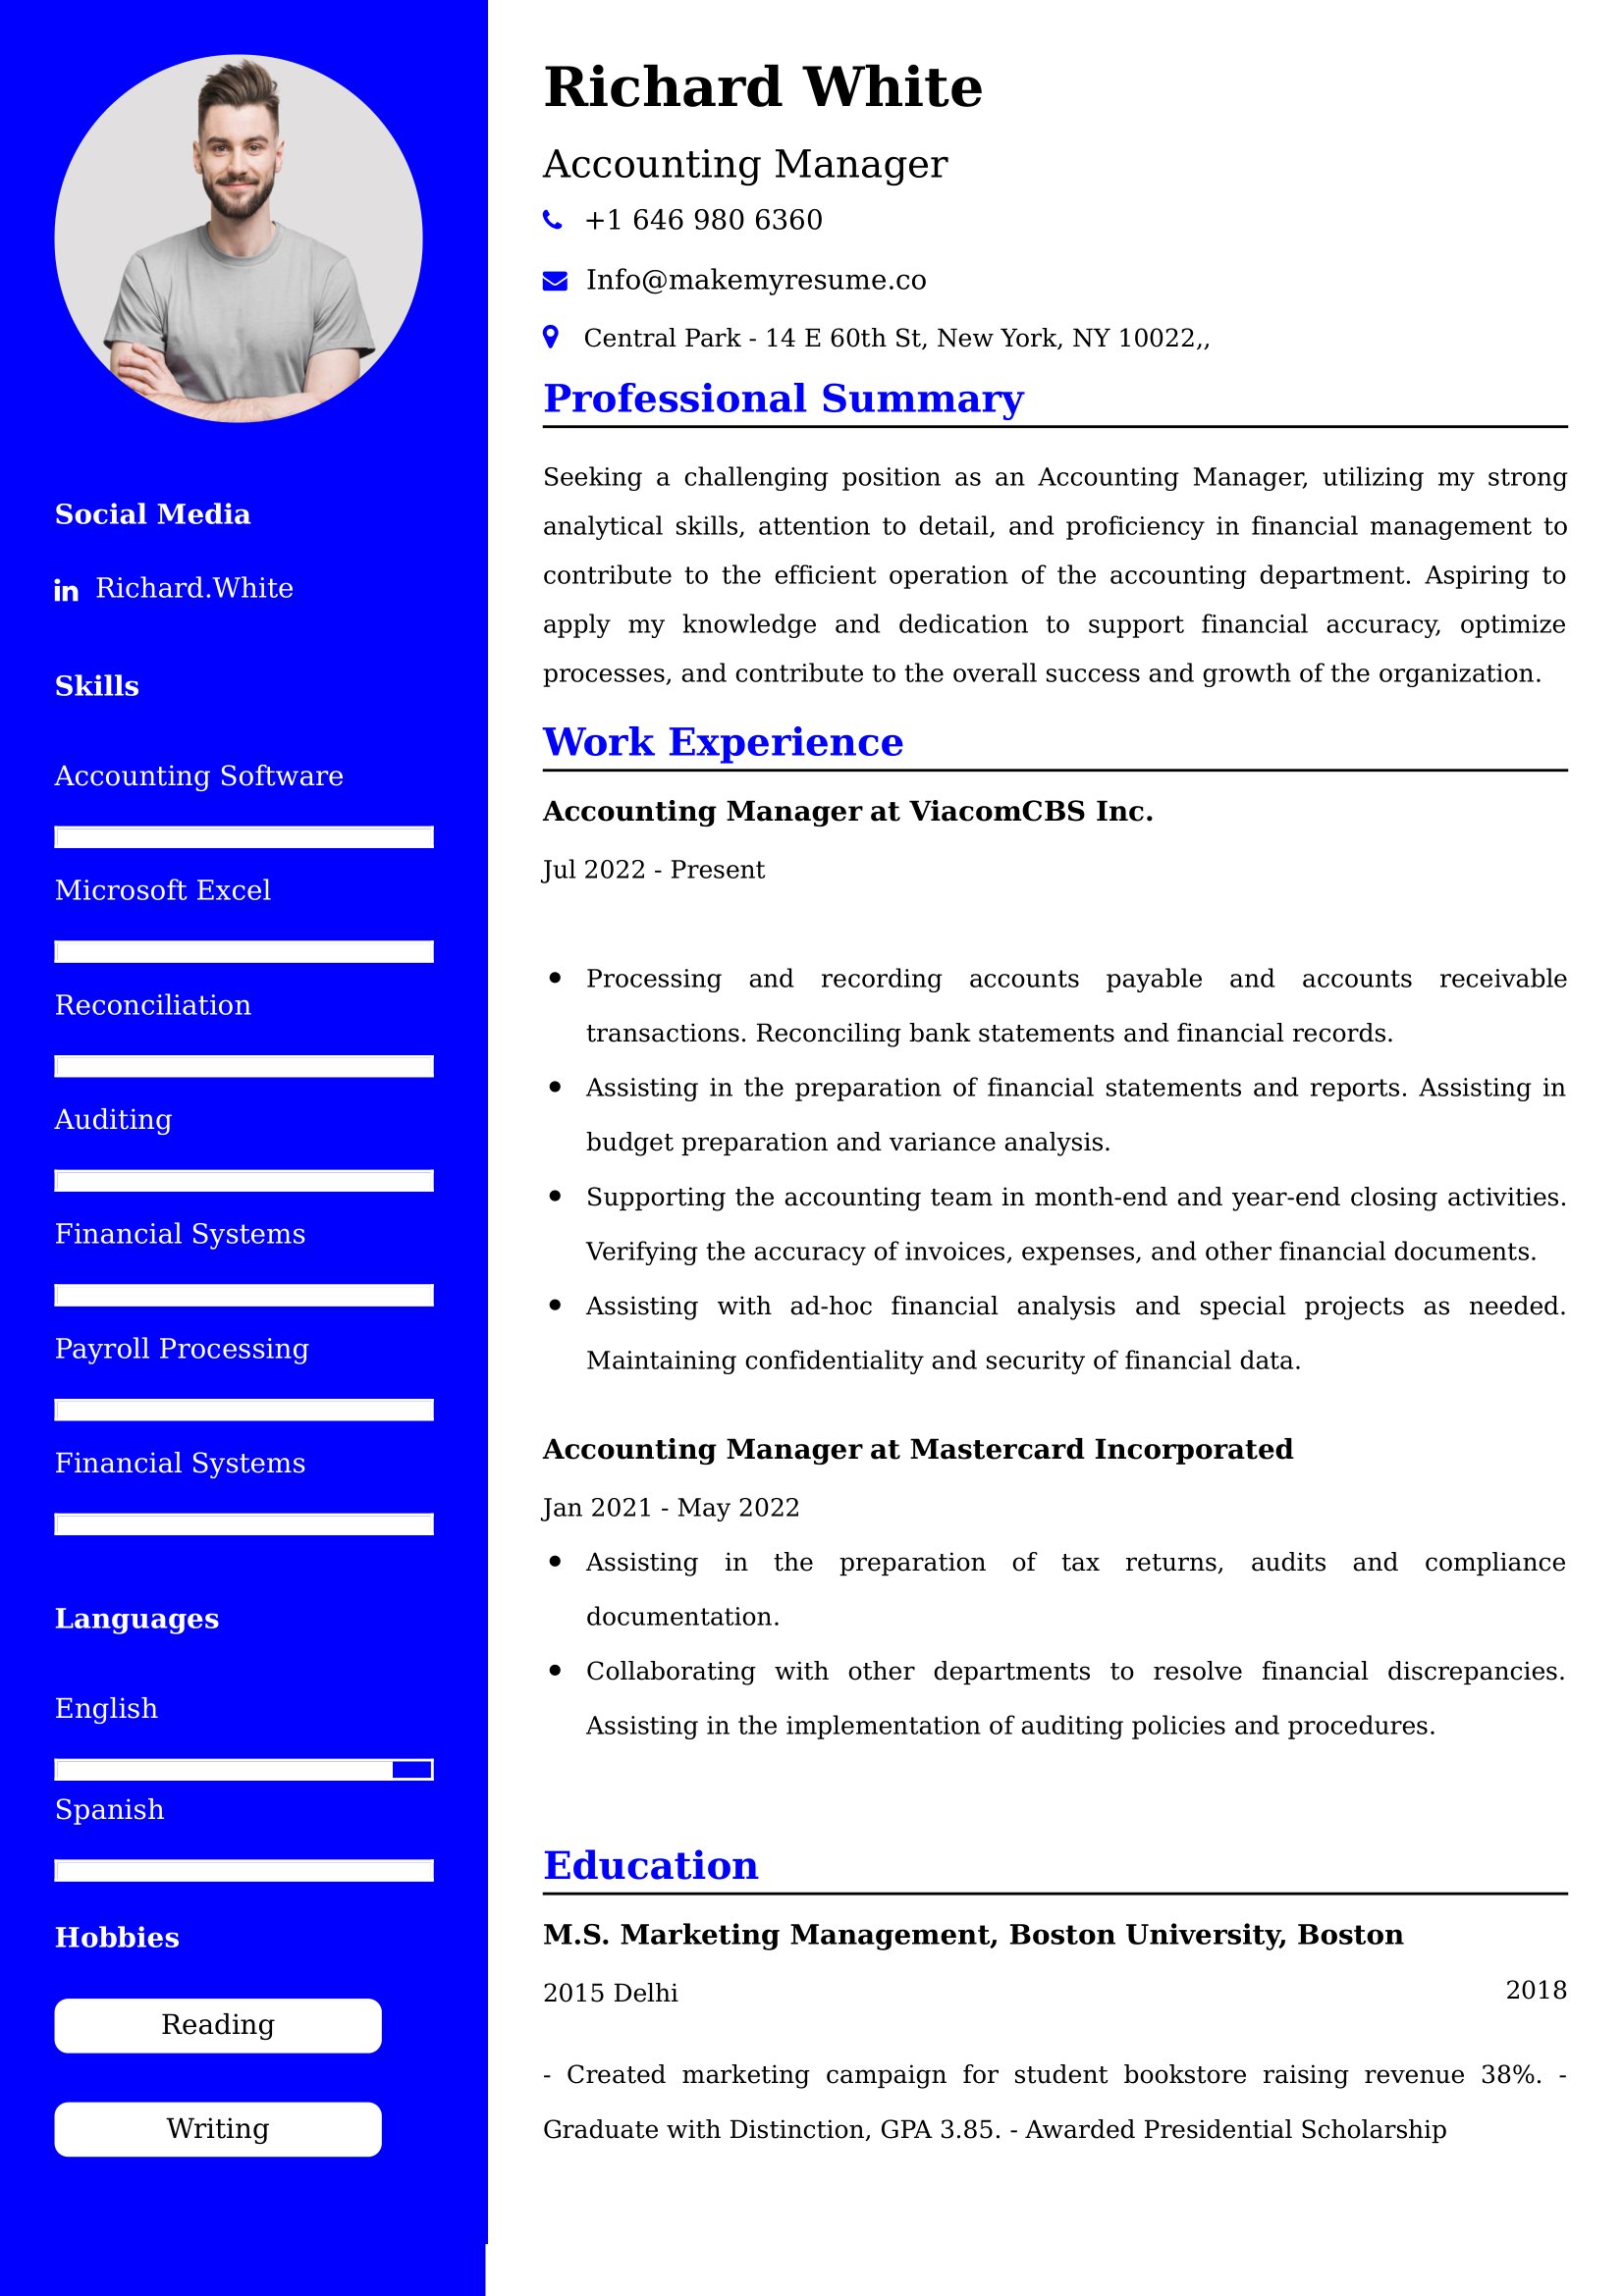 Accounting Manager Resume Examples - Brazilian Format, Latest Template